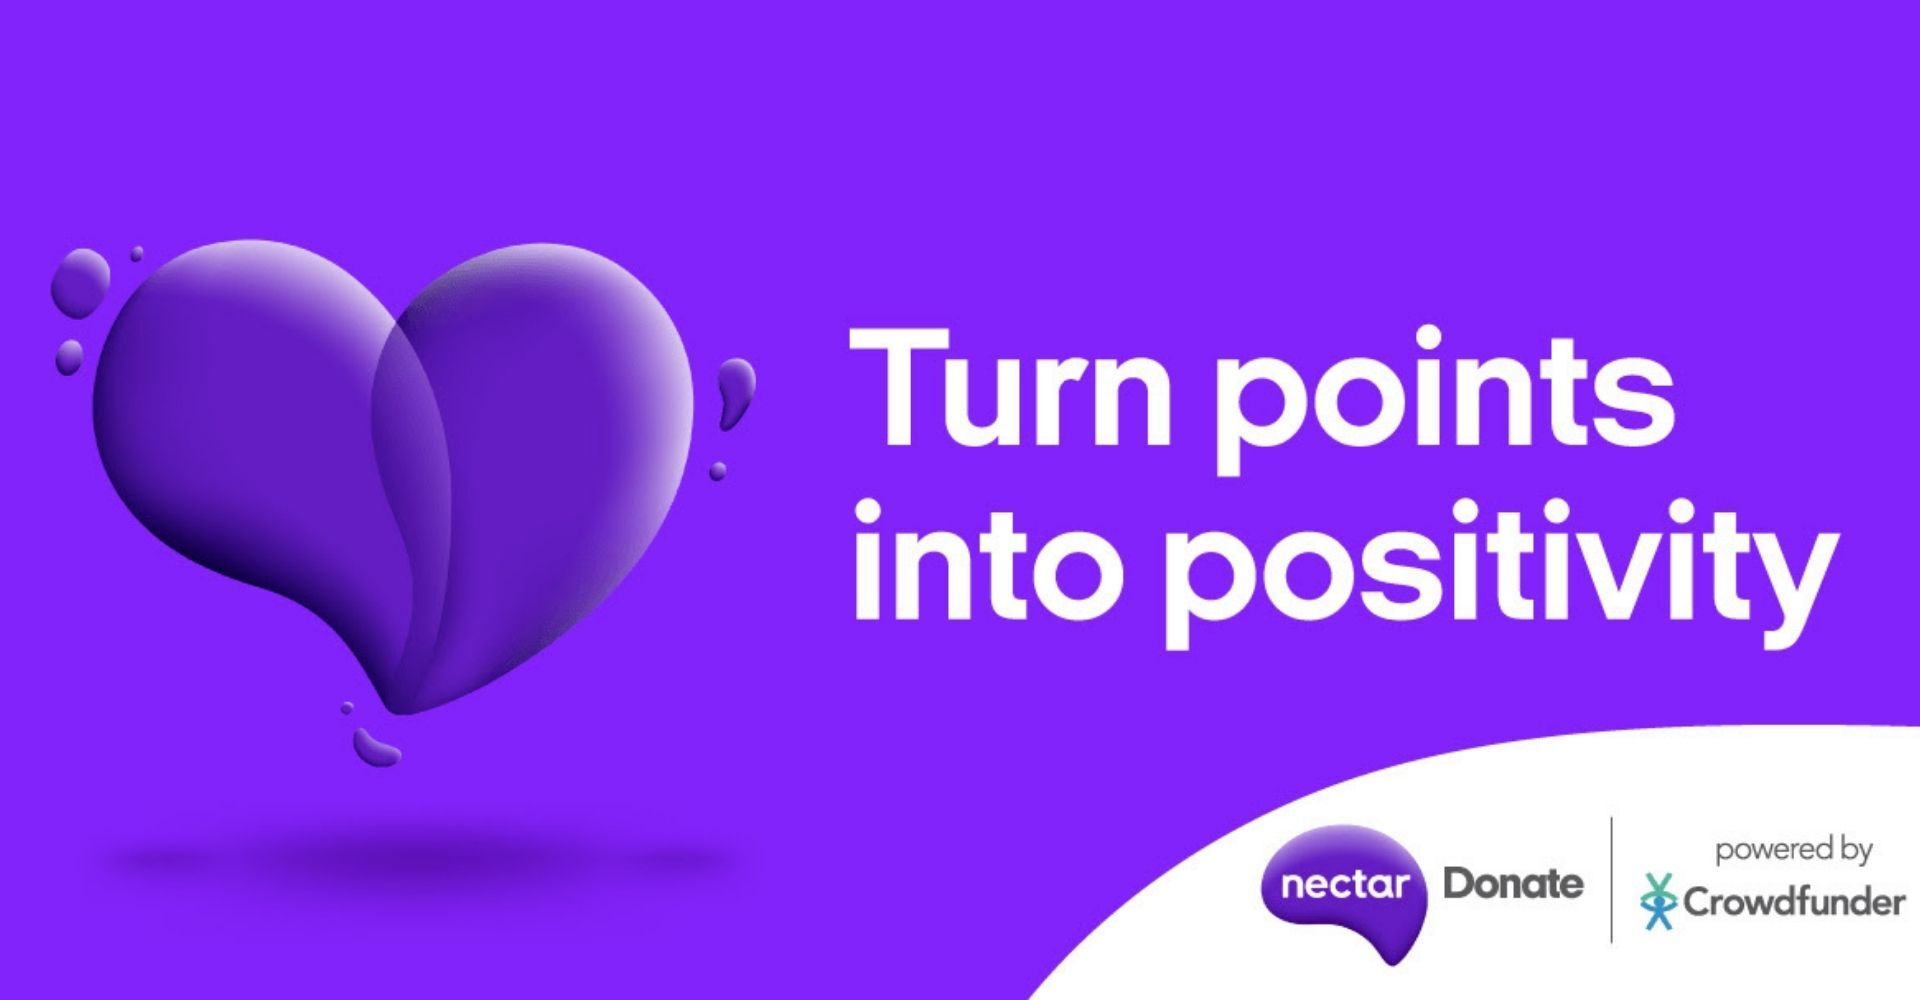 Turn points into positivity: new Nectar launch enables customers to donate points to charity